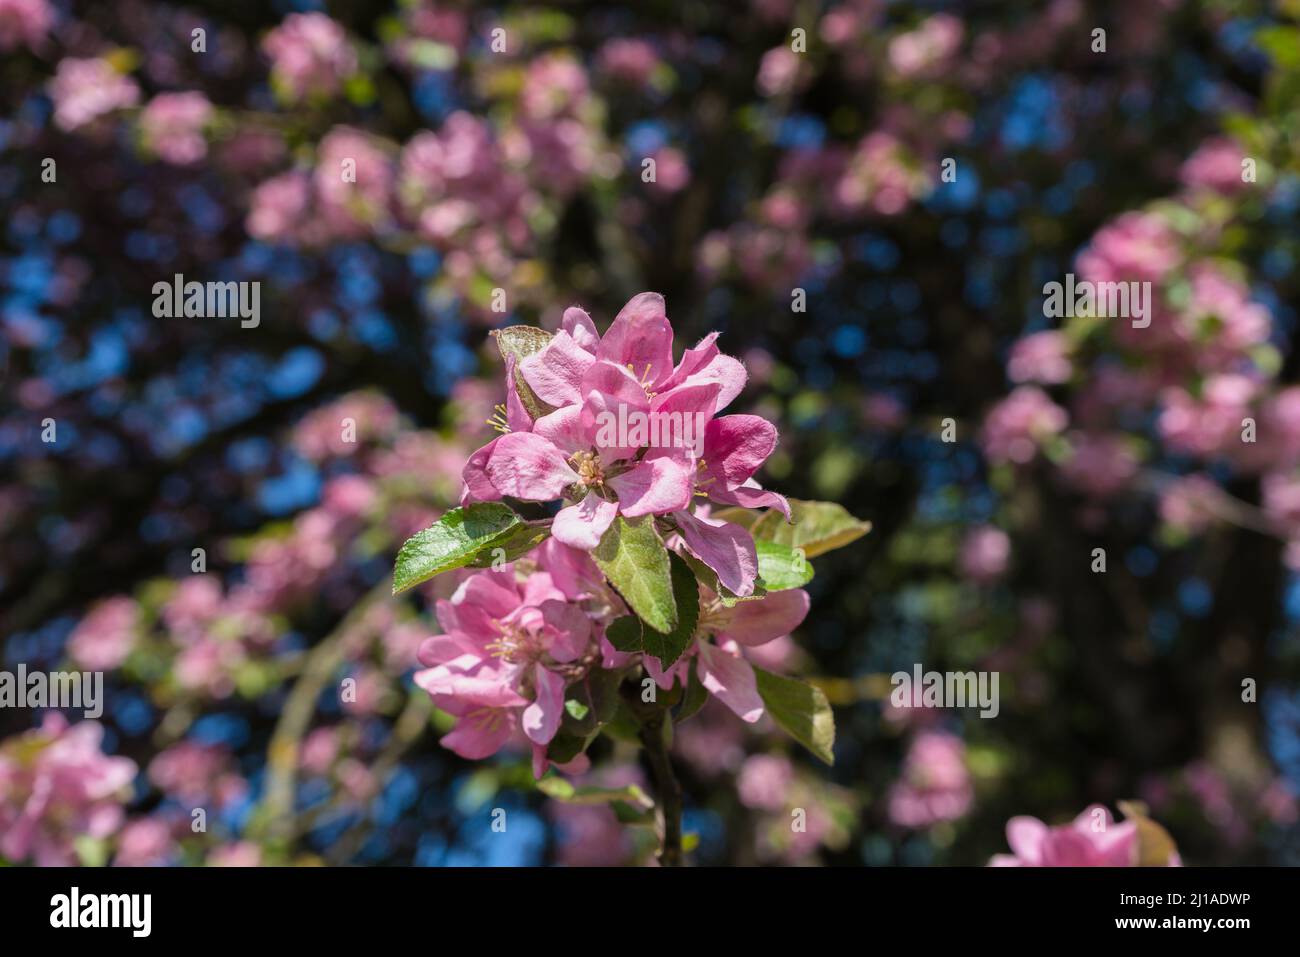 close up view of flowers of Malus niedzwetzkyana, or Niedzwetzky's apple in bloom on sunny spring day Stock Photo